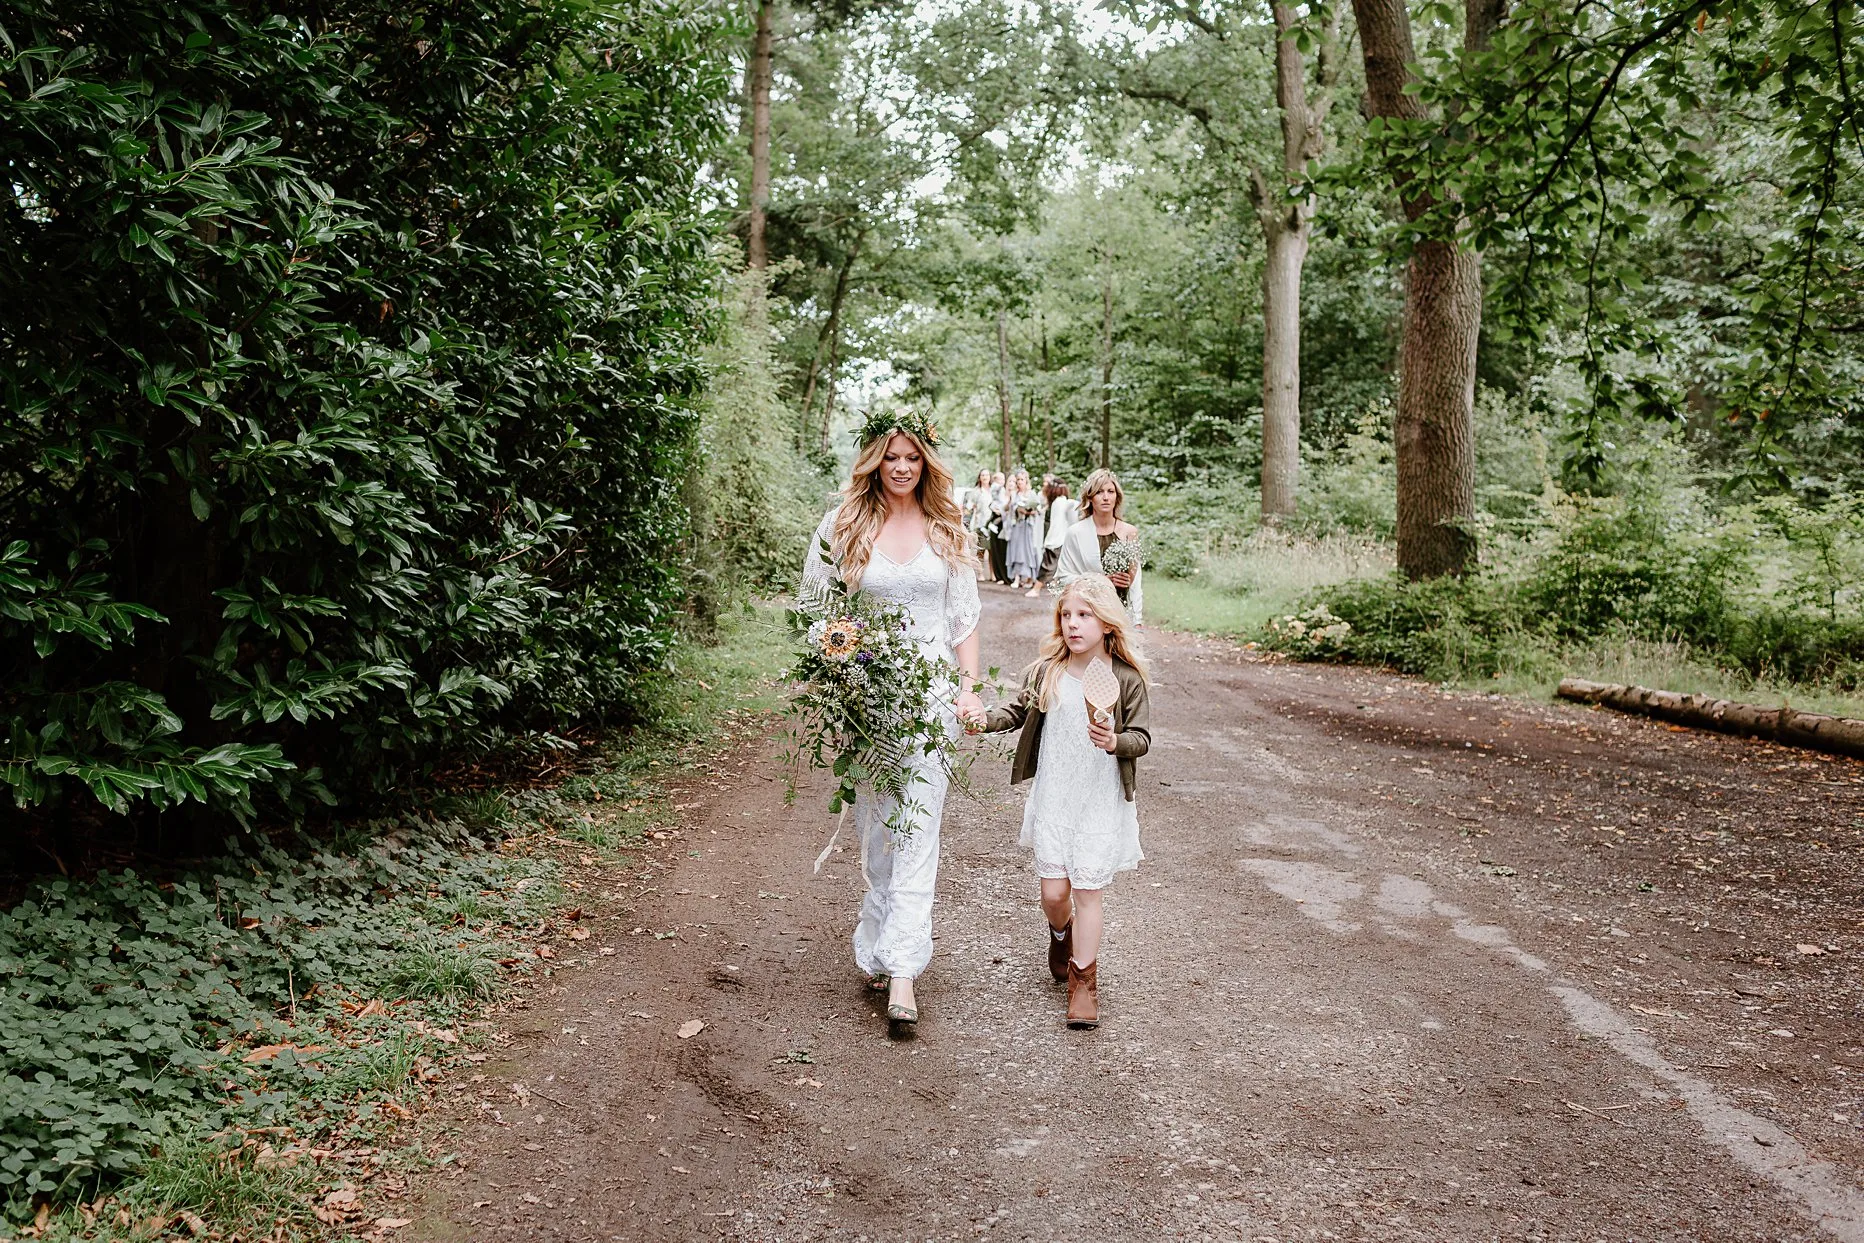 Bride holding hands with small flower girl walking through the woods to outdoor ceremony at camp katur. Bride is wearing a long white crochet wedding dress and holding a large wild foliage bouquet.